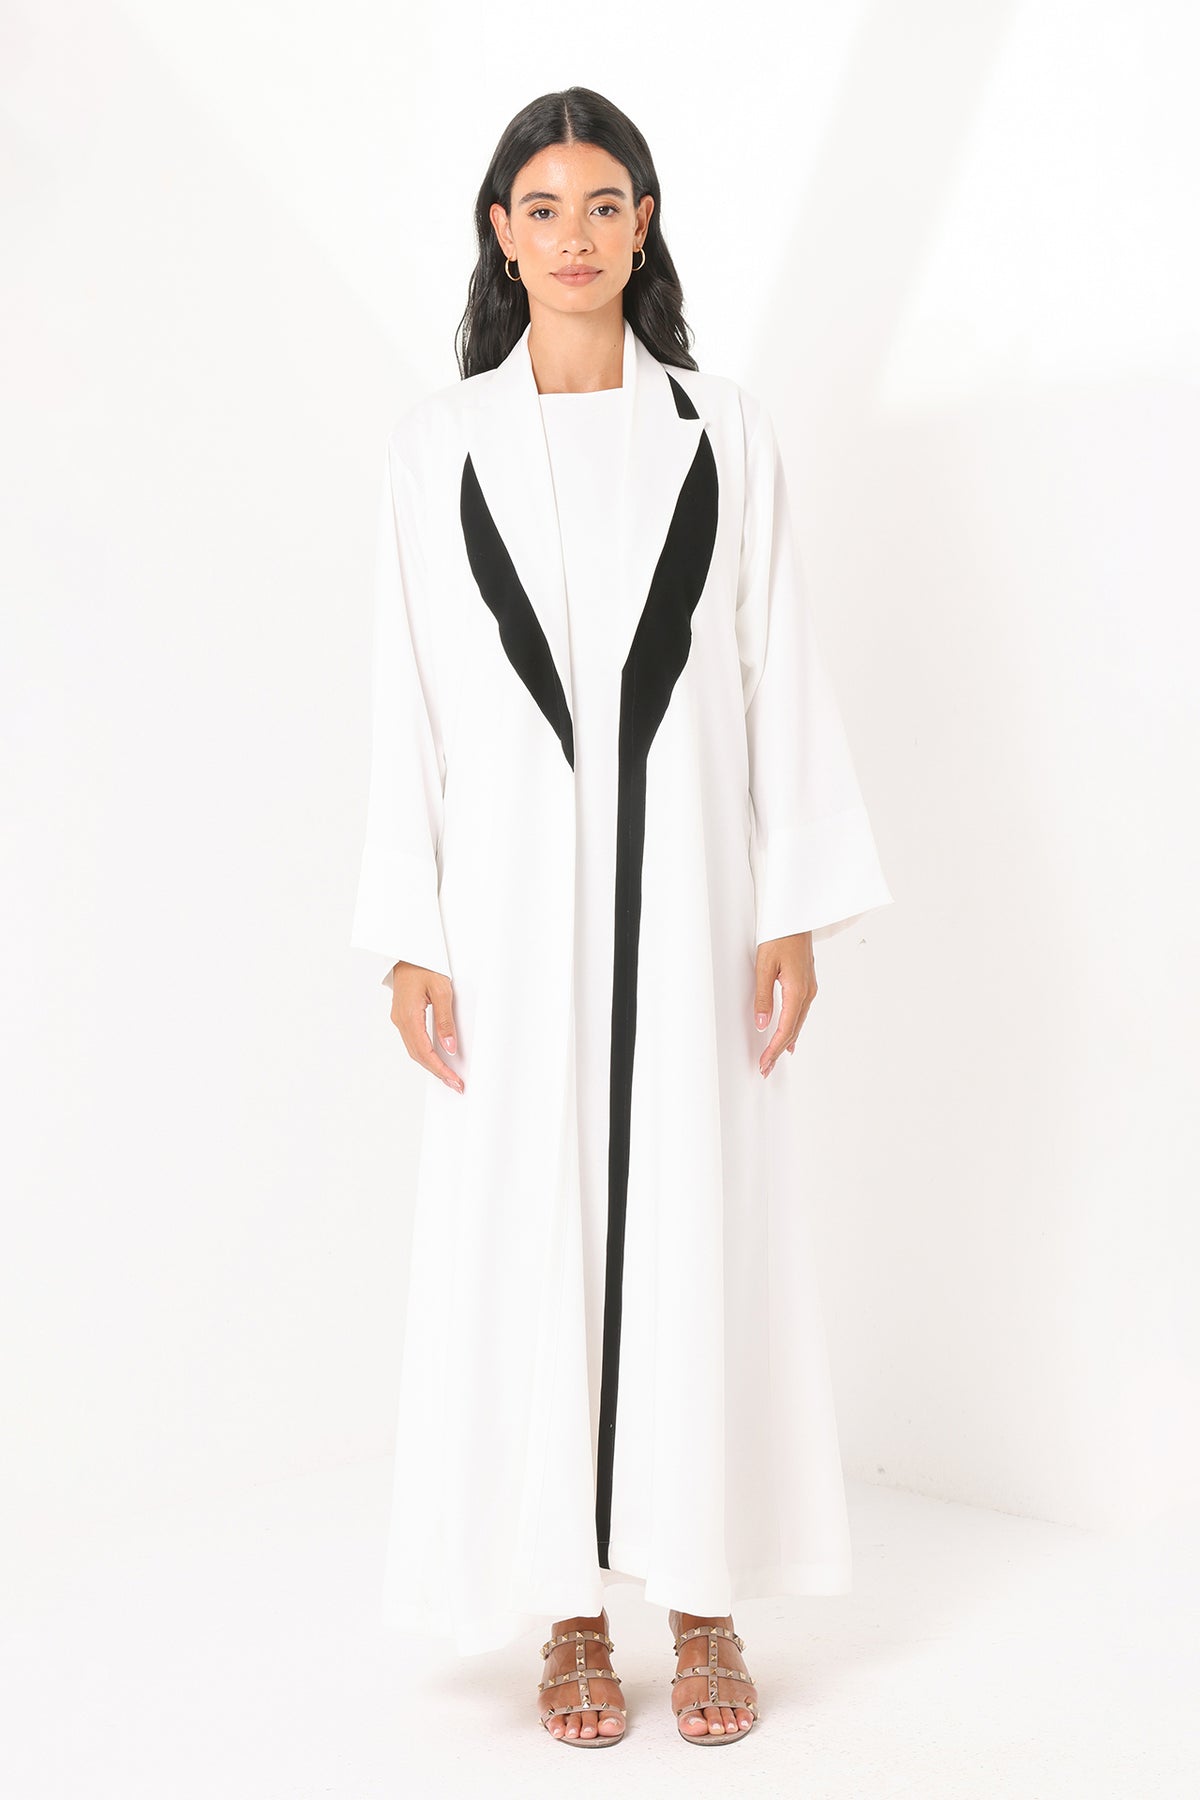 White Plain Abaya With Collar On The Front And Black Front Detail